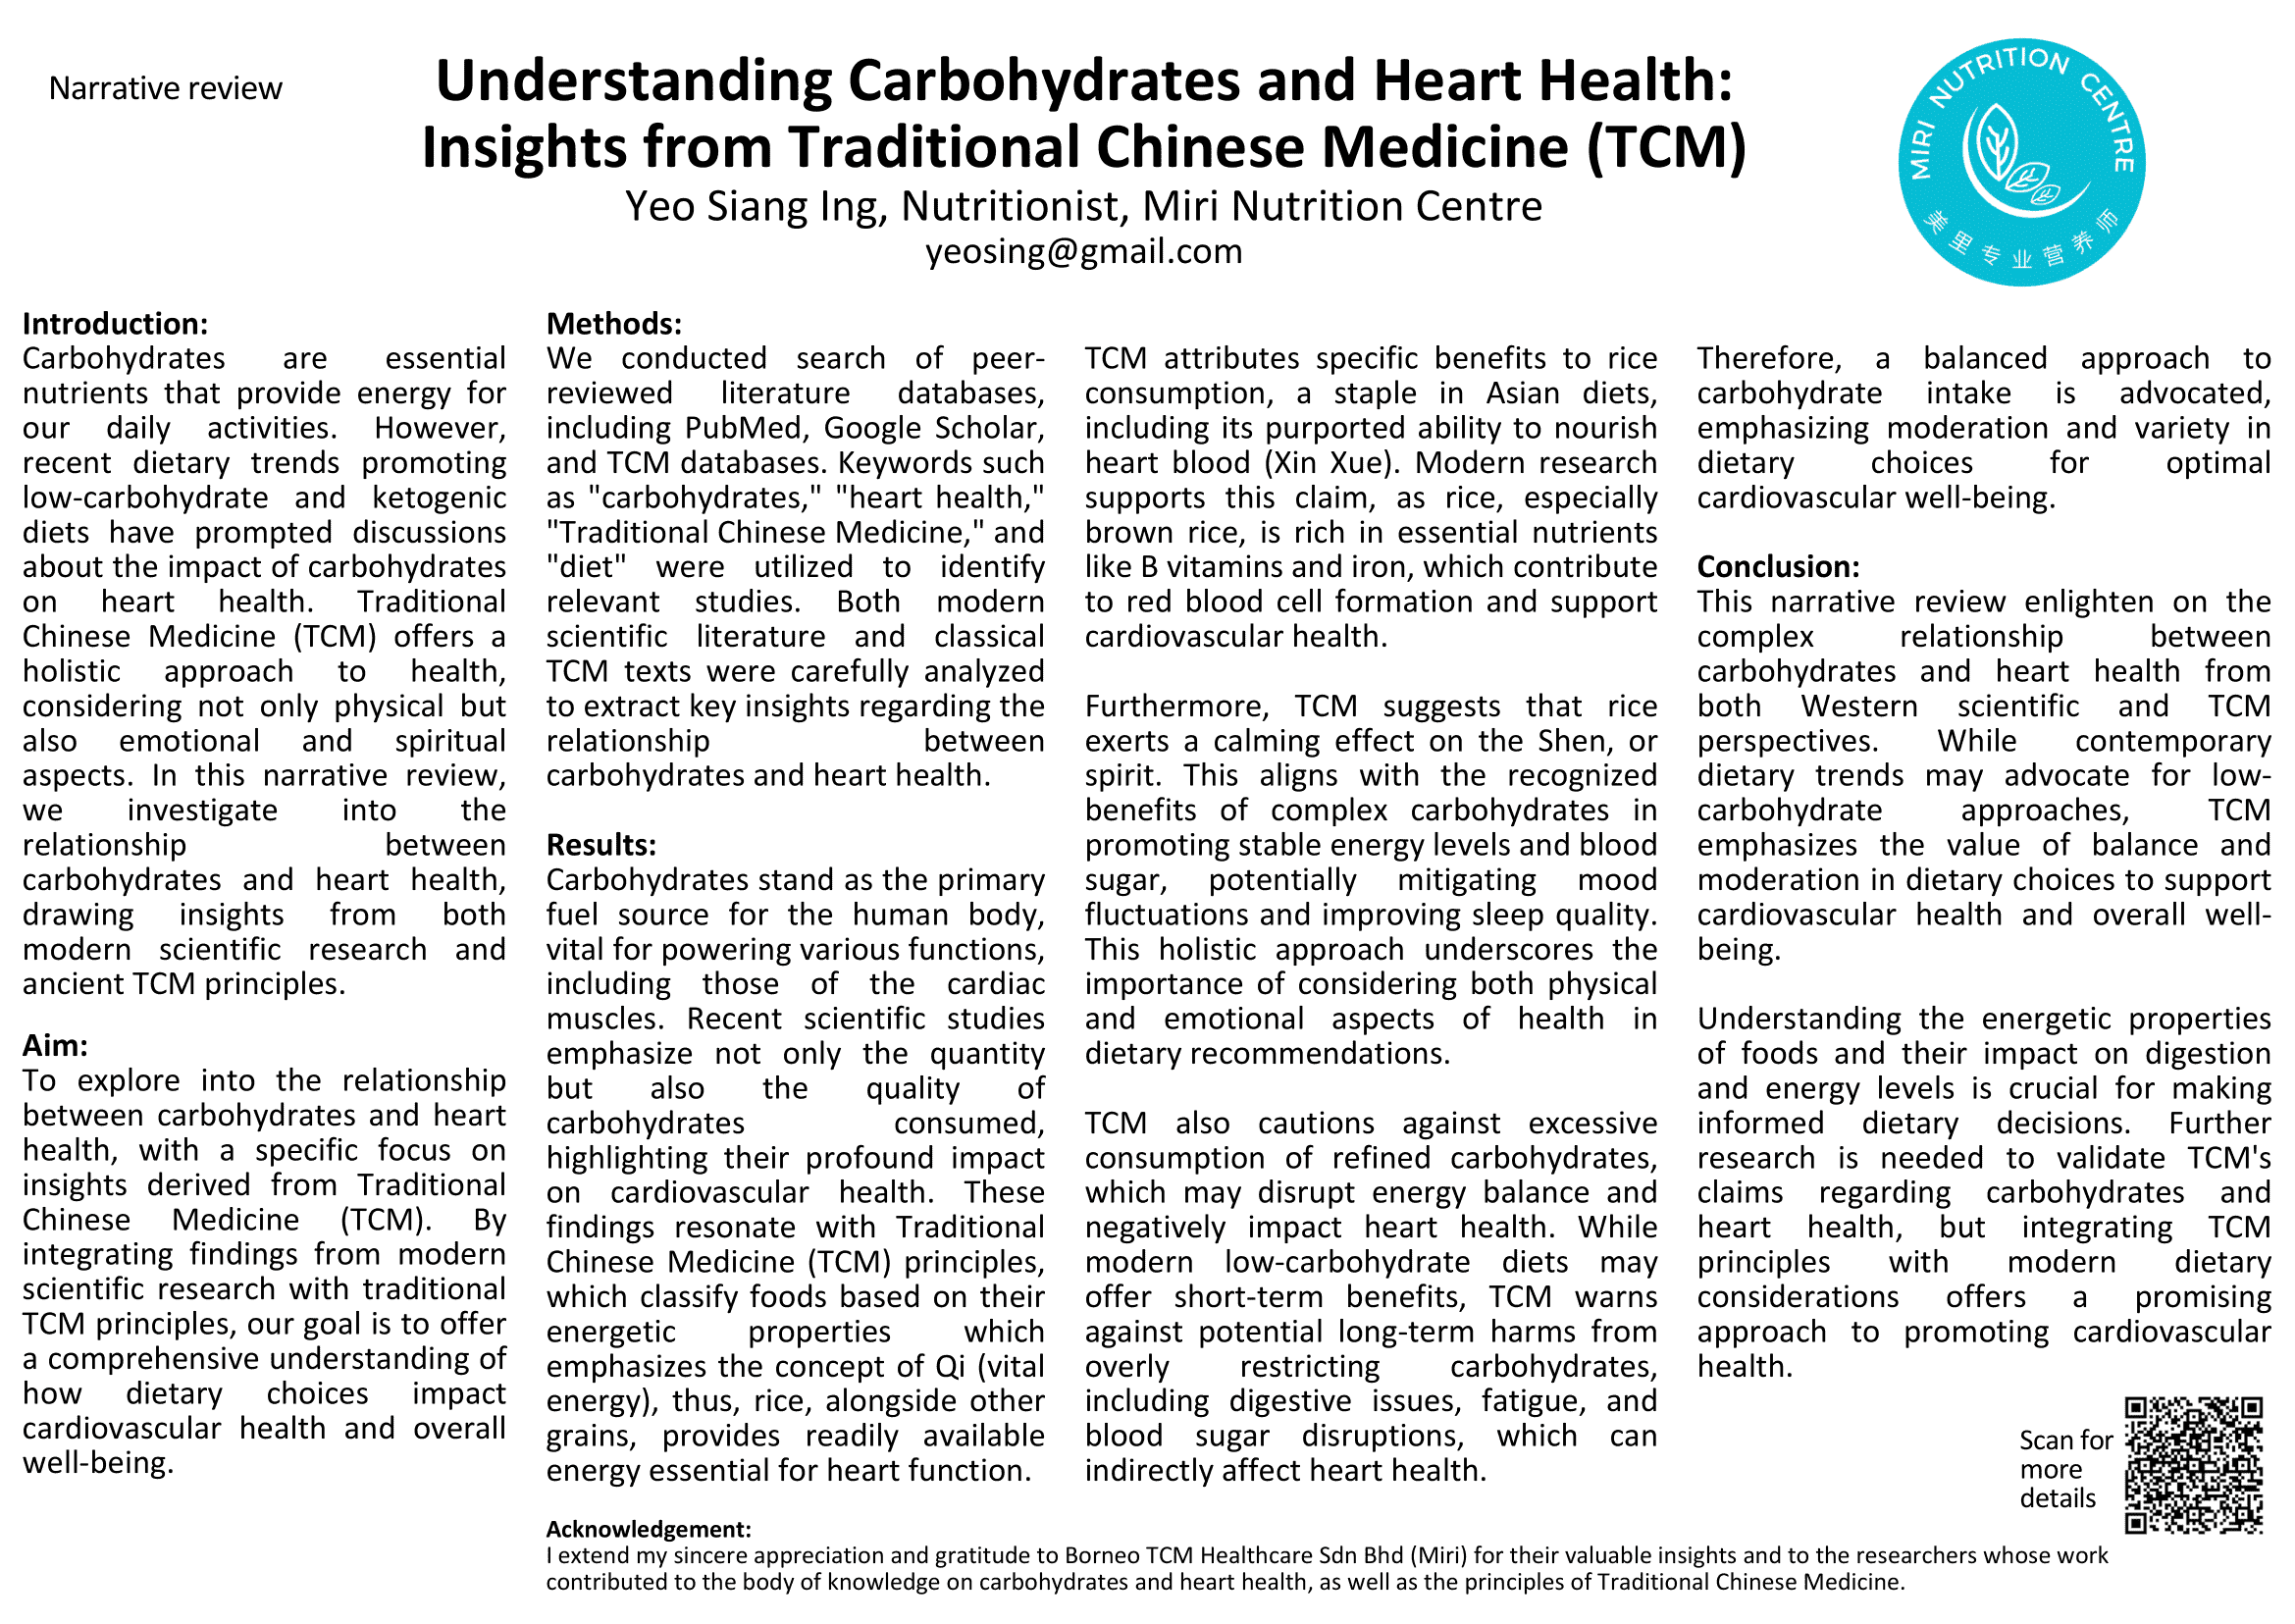 POSTER 1 - Siang Ing, Y.-Understanding Carbohydrates and Heart Health Insights from TCM-1